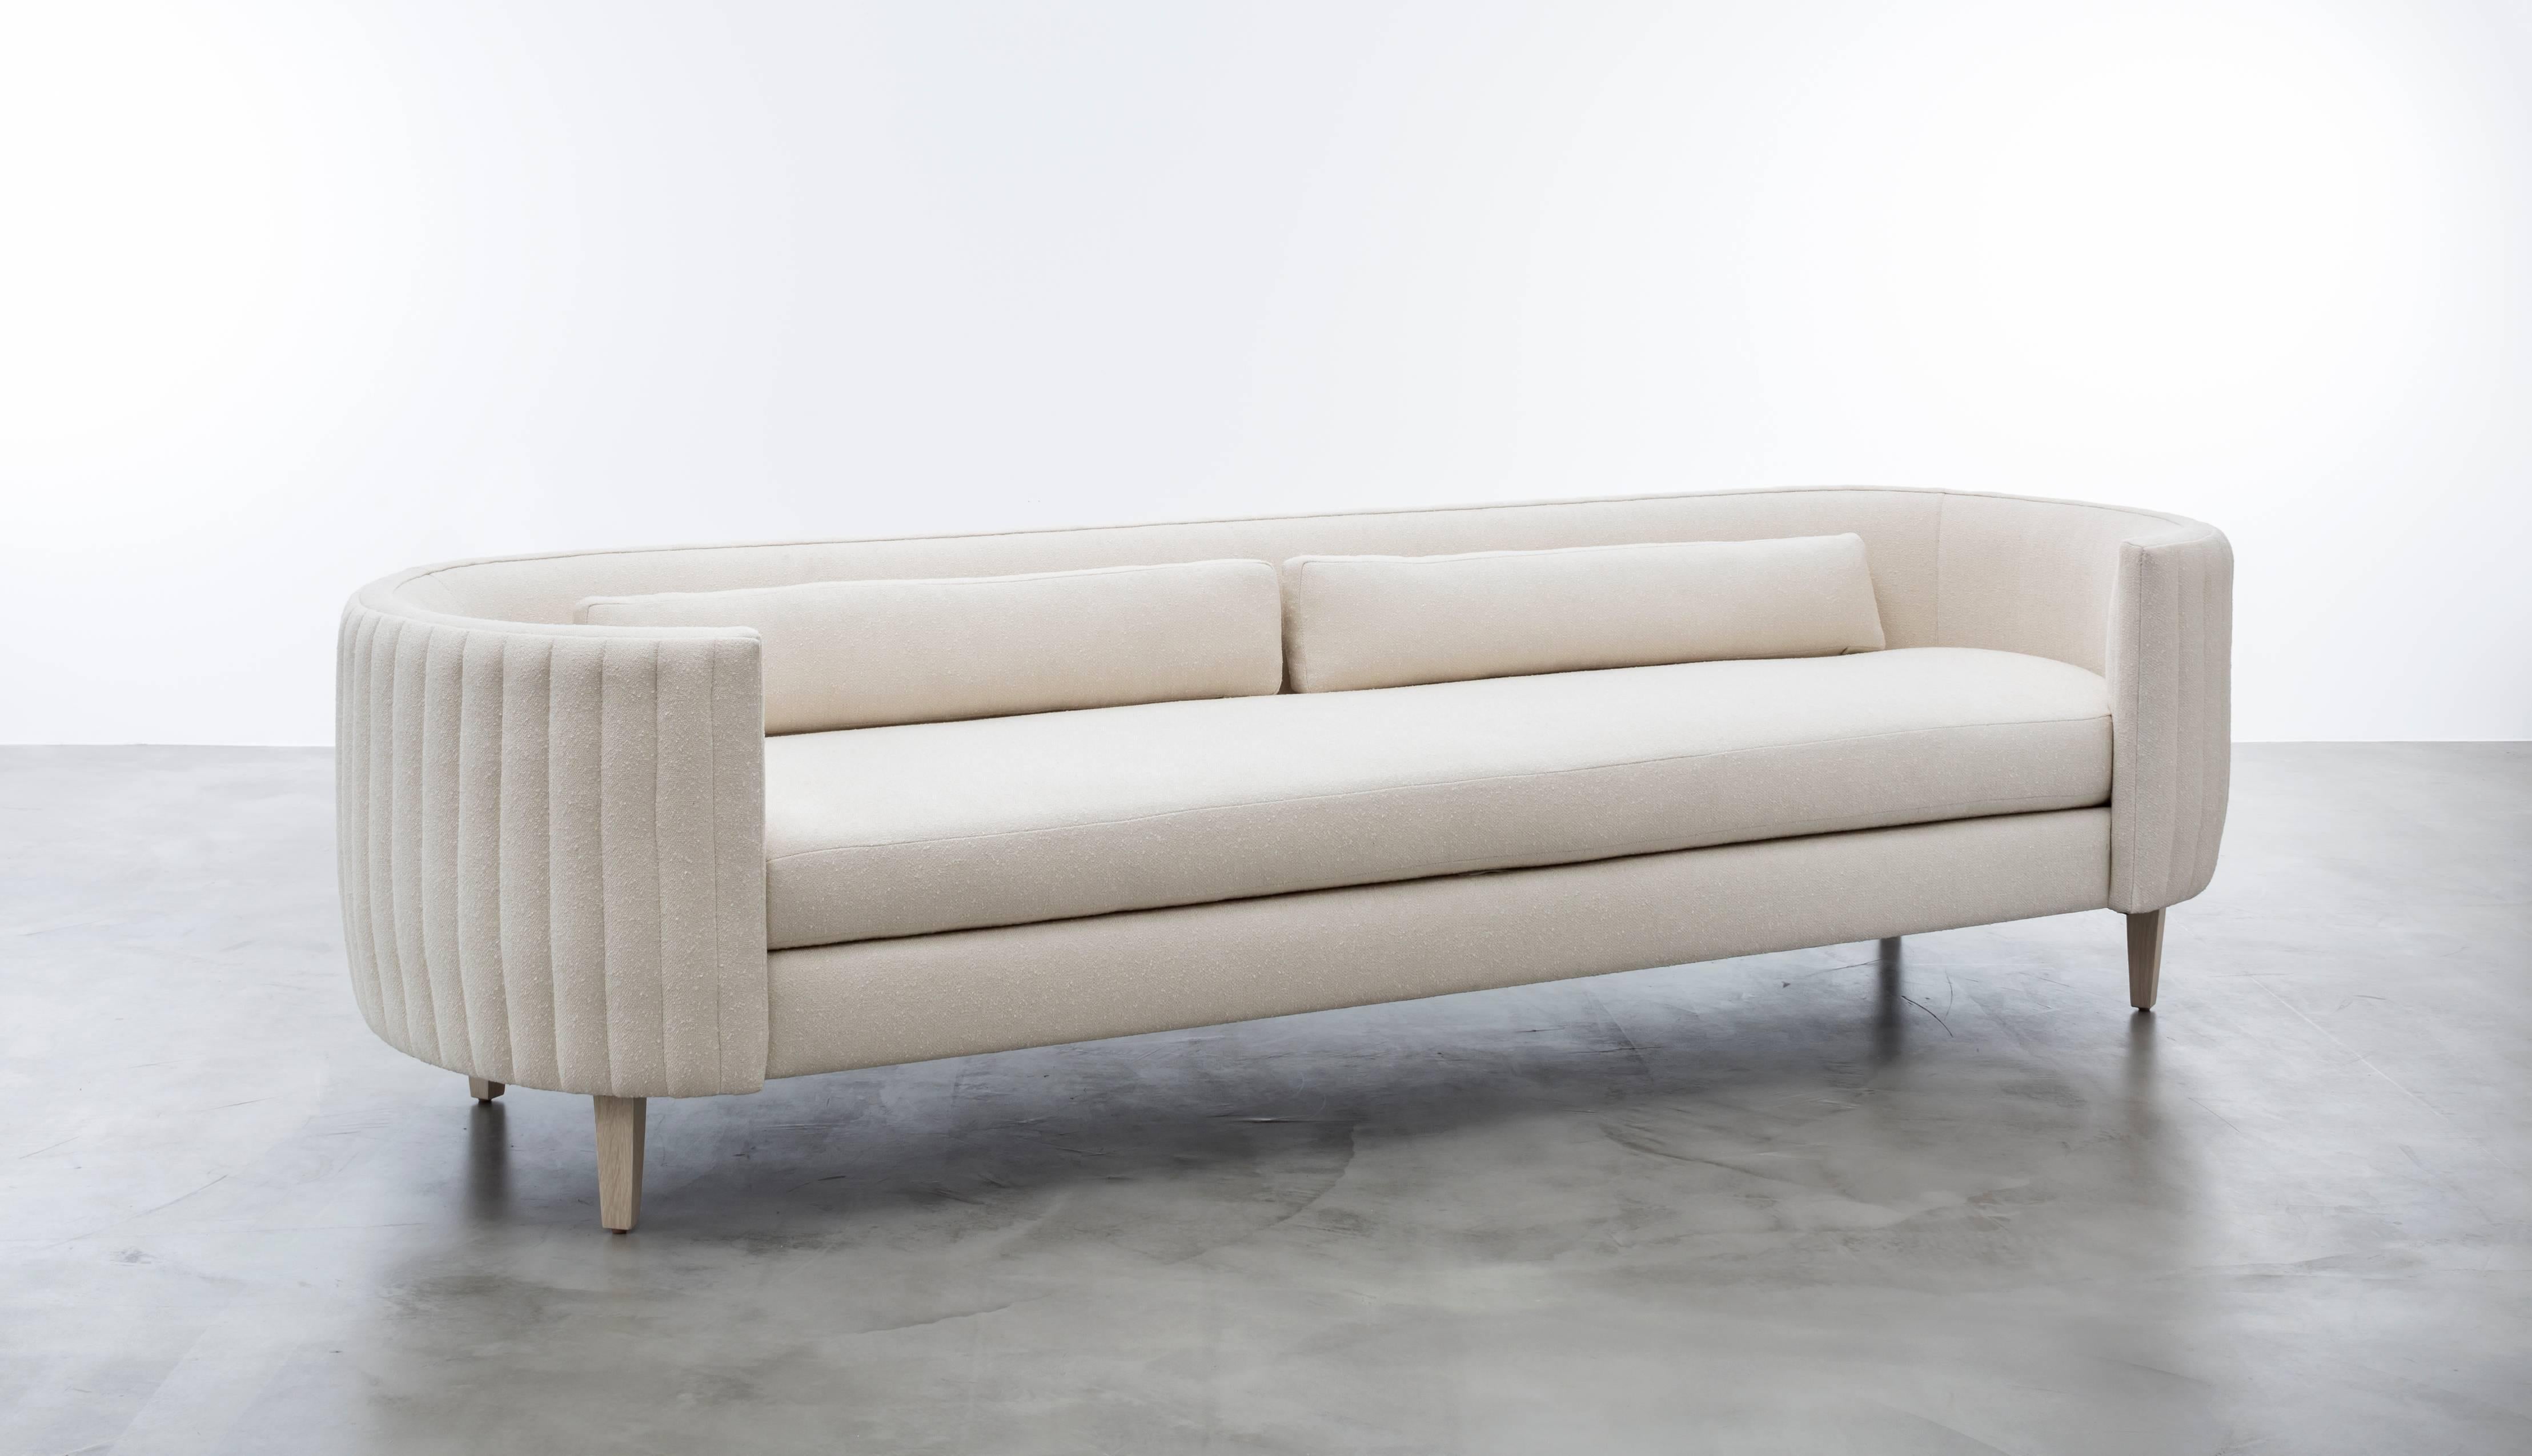 CLARISSE SOFA - Modern Sofa in Cream Boucle

The Clarisse sofa is a modern and stylish addition to any living space. Its high-end construction and premium materials make it a durable and long-lasting investment piece. The wooly lamb boucle